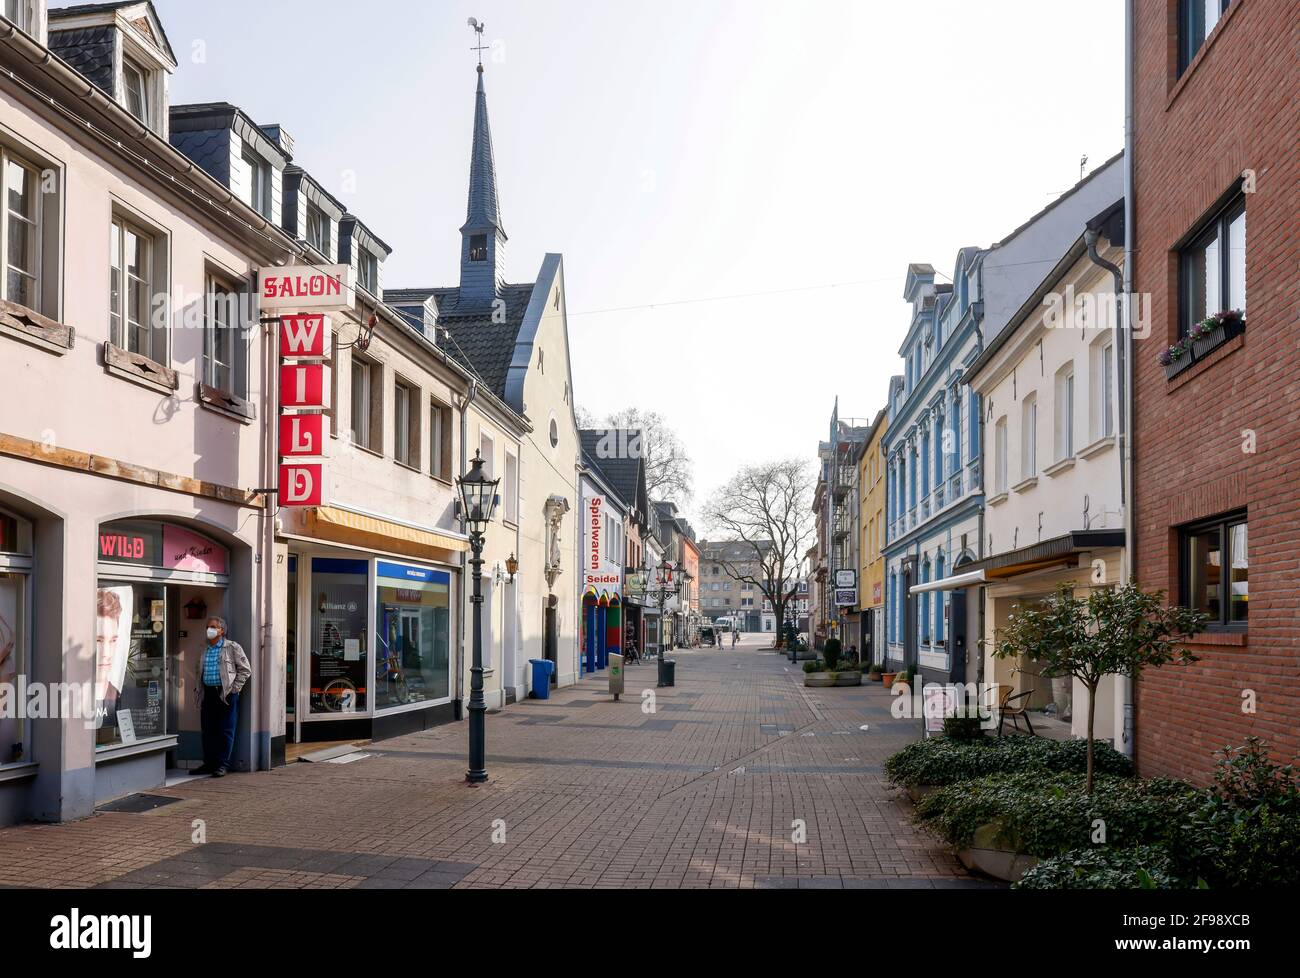 Krefeld, North Rhine-Westphalia, Germany - Krefeld Uerdingen in times of the corona crisis with the second lockdown, most shops are closed, only a few passers-by are walking on Oberstrasse, the main shopping street in the district. Stock Photo